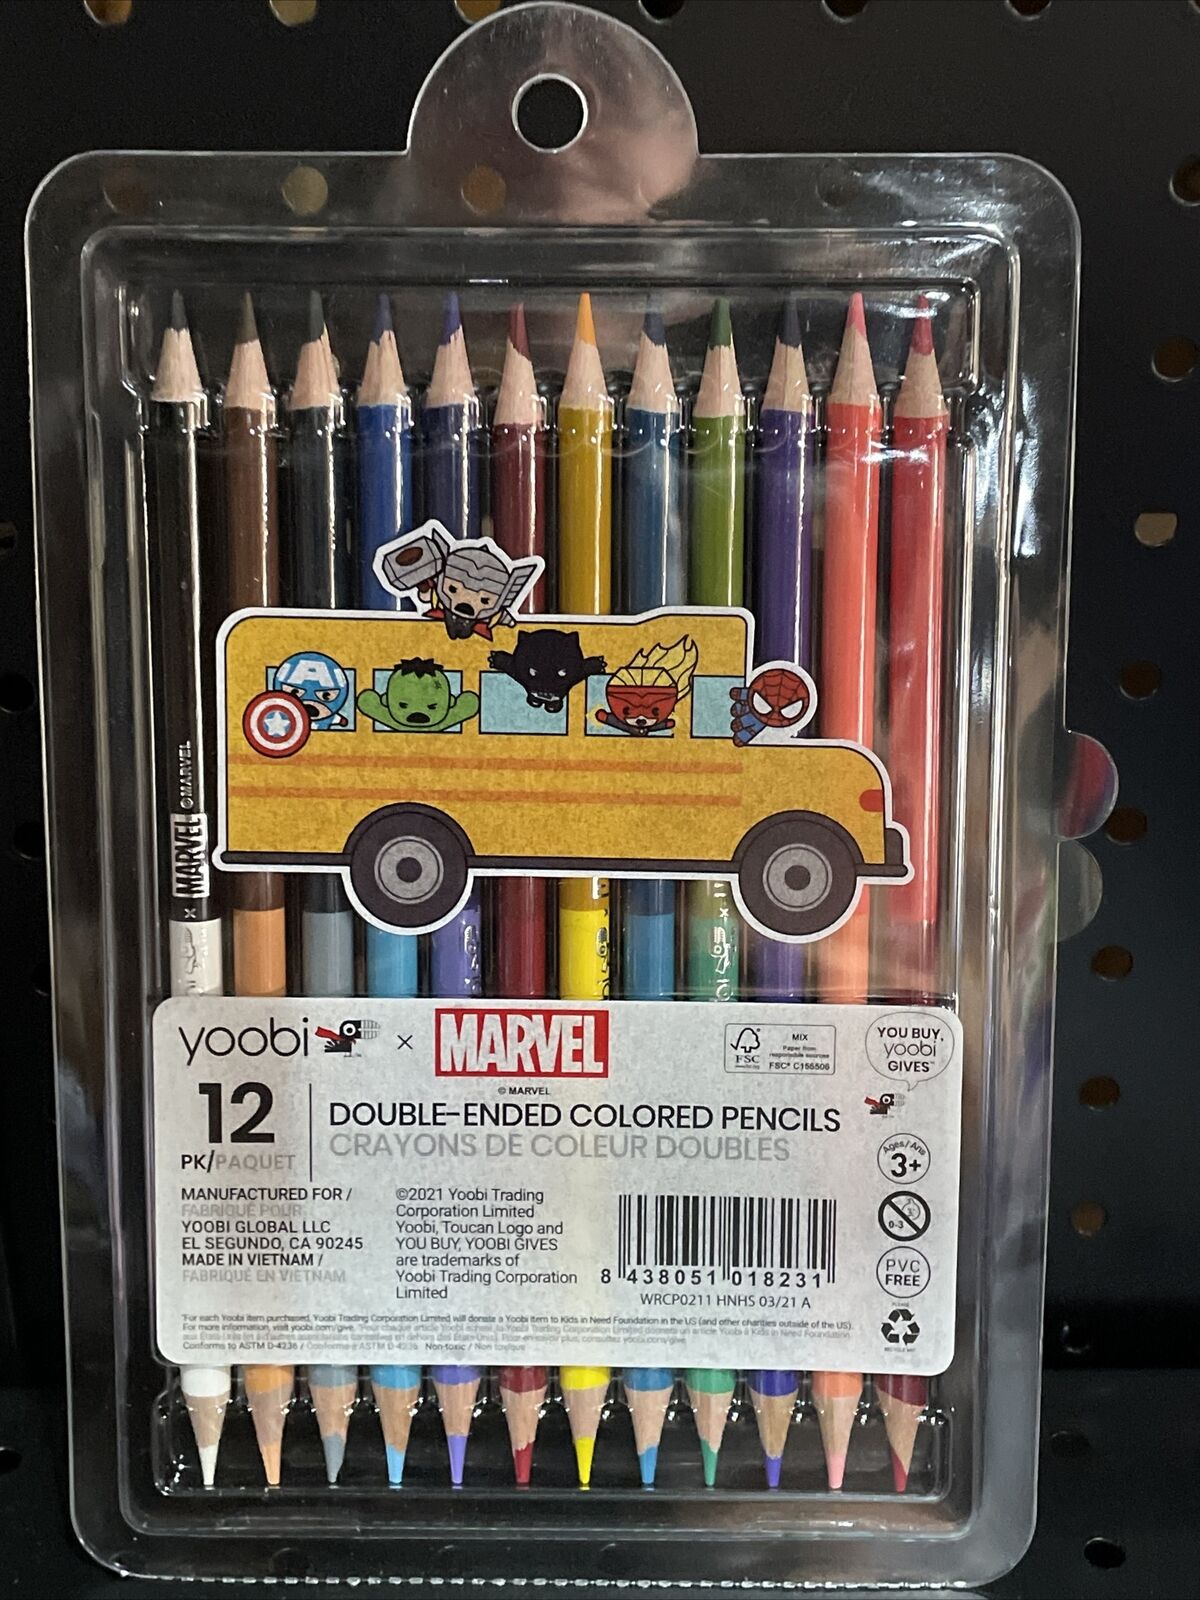 Yoobi Marvel Colored Pencils Set of 12 Double-Ended Colored